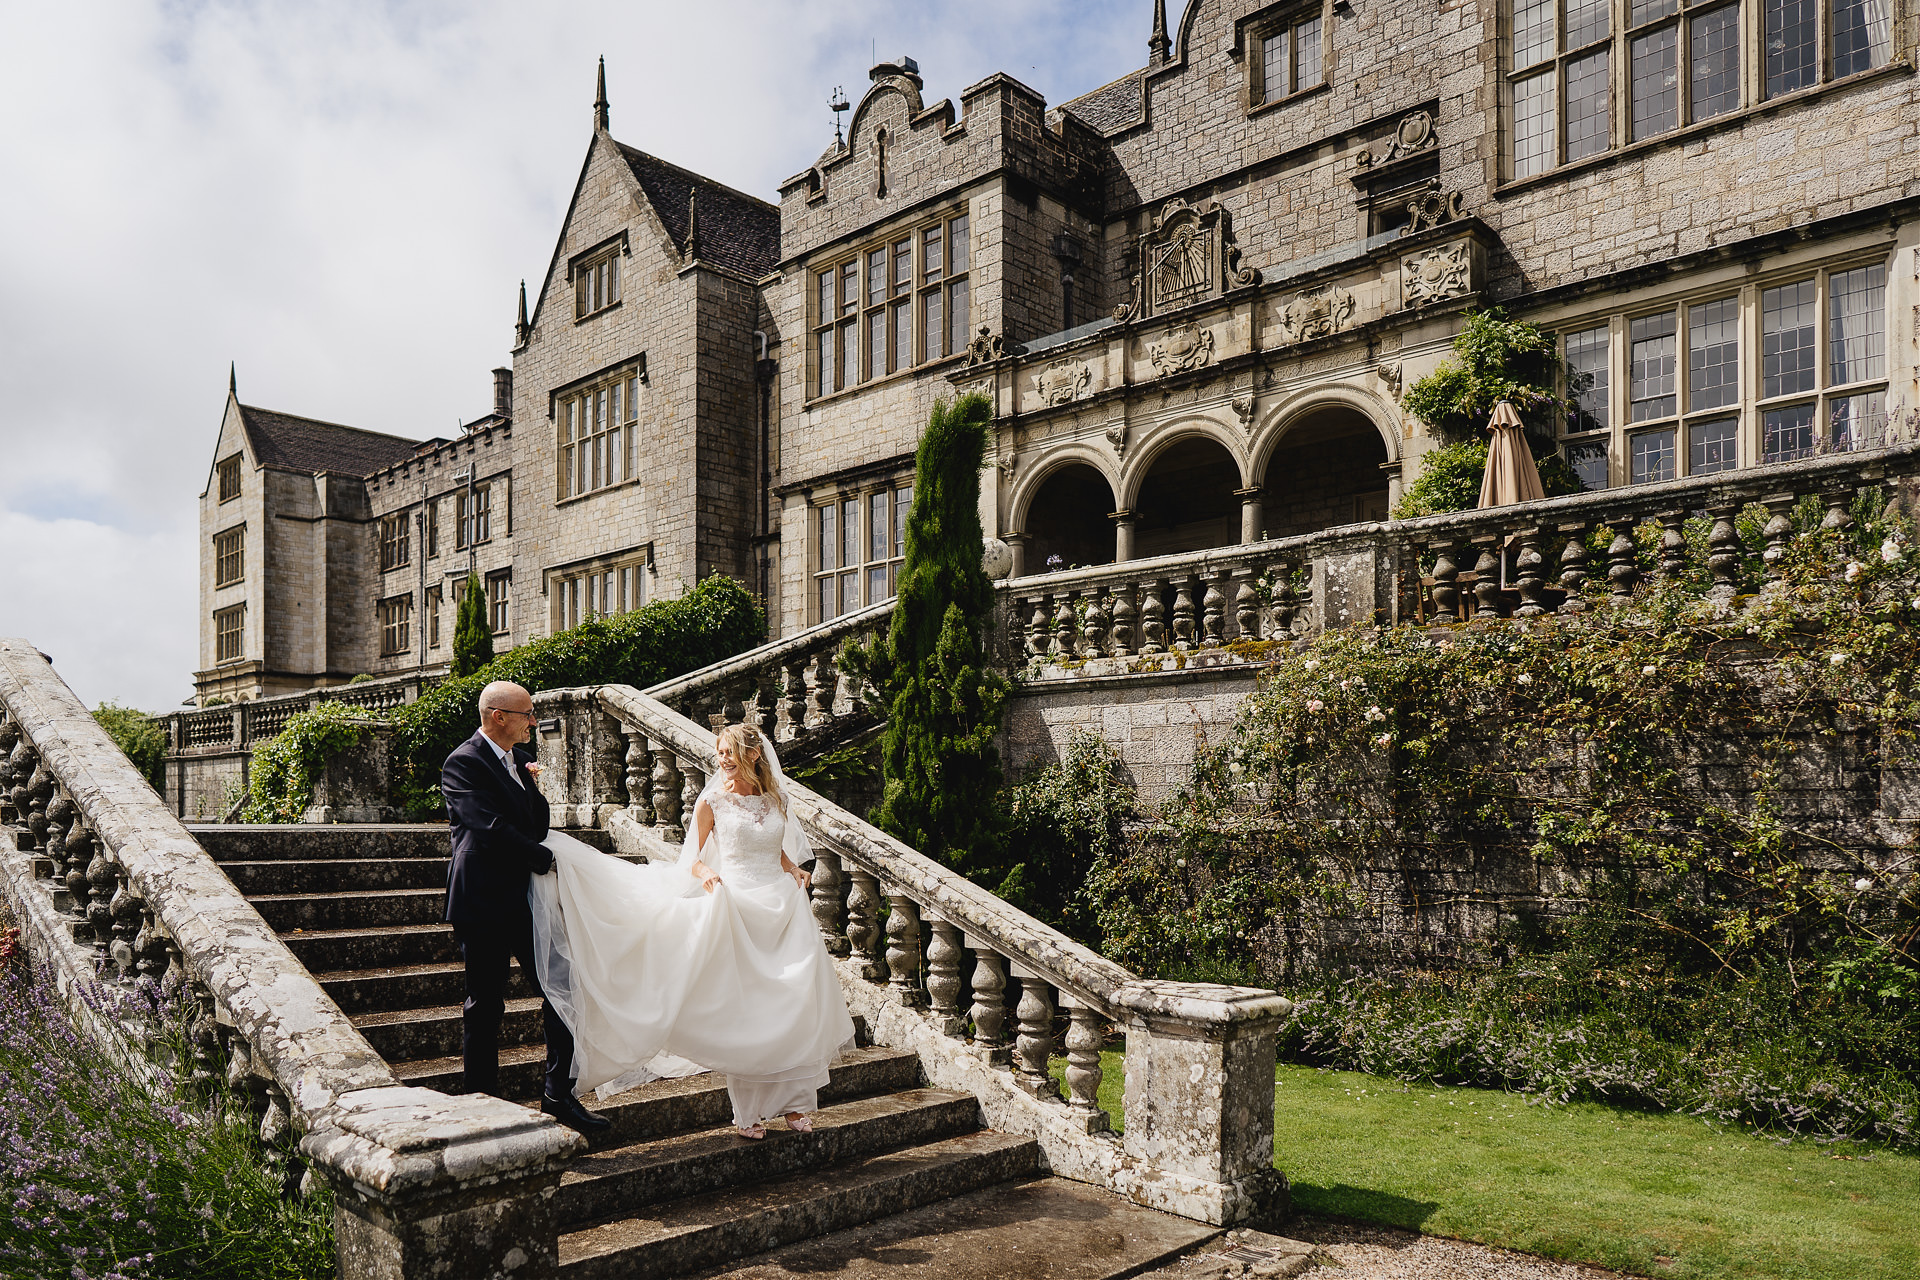 Bride and groom walking down outside steps after a wedding at Bovey Castle